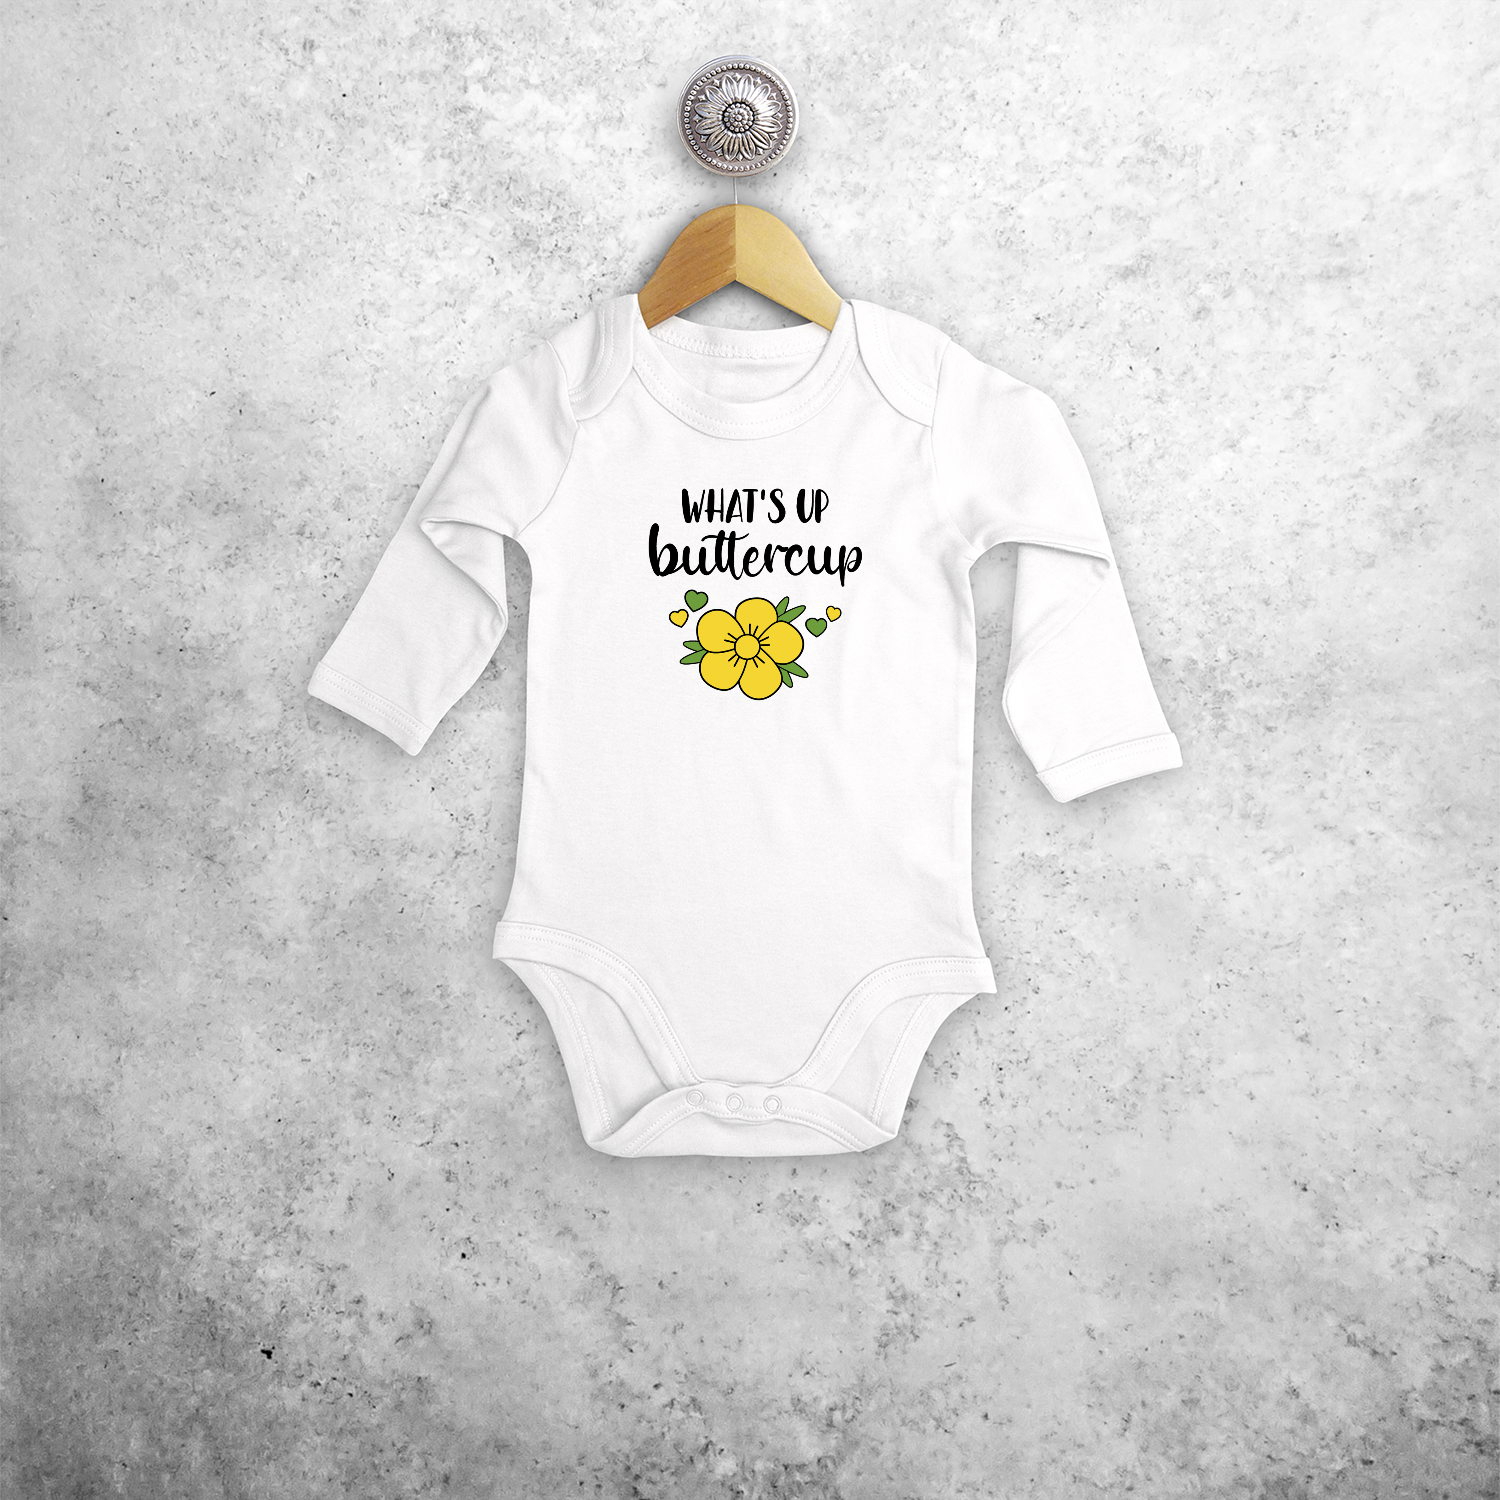 'What's up buttercup' baby longsleeve bodysuit